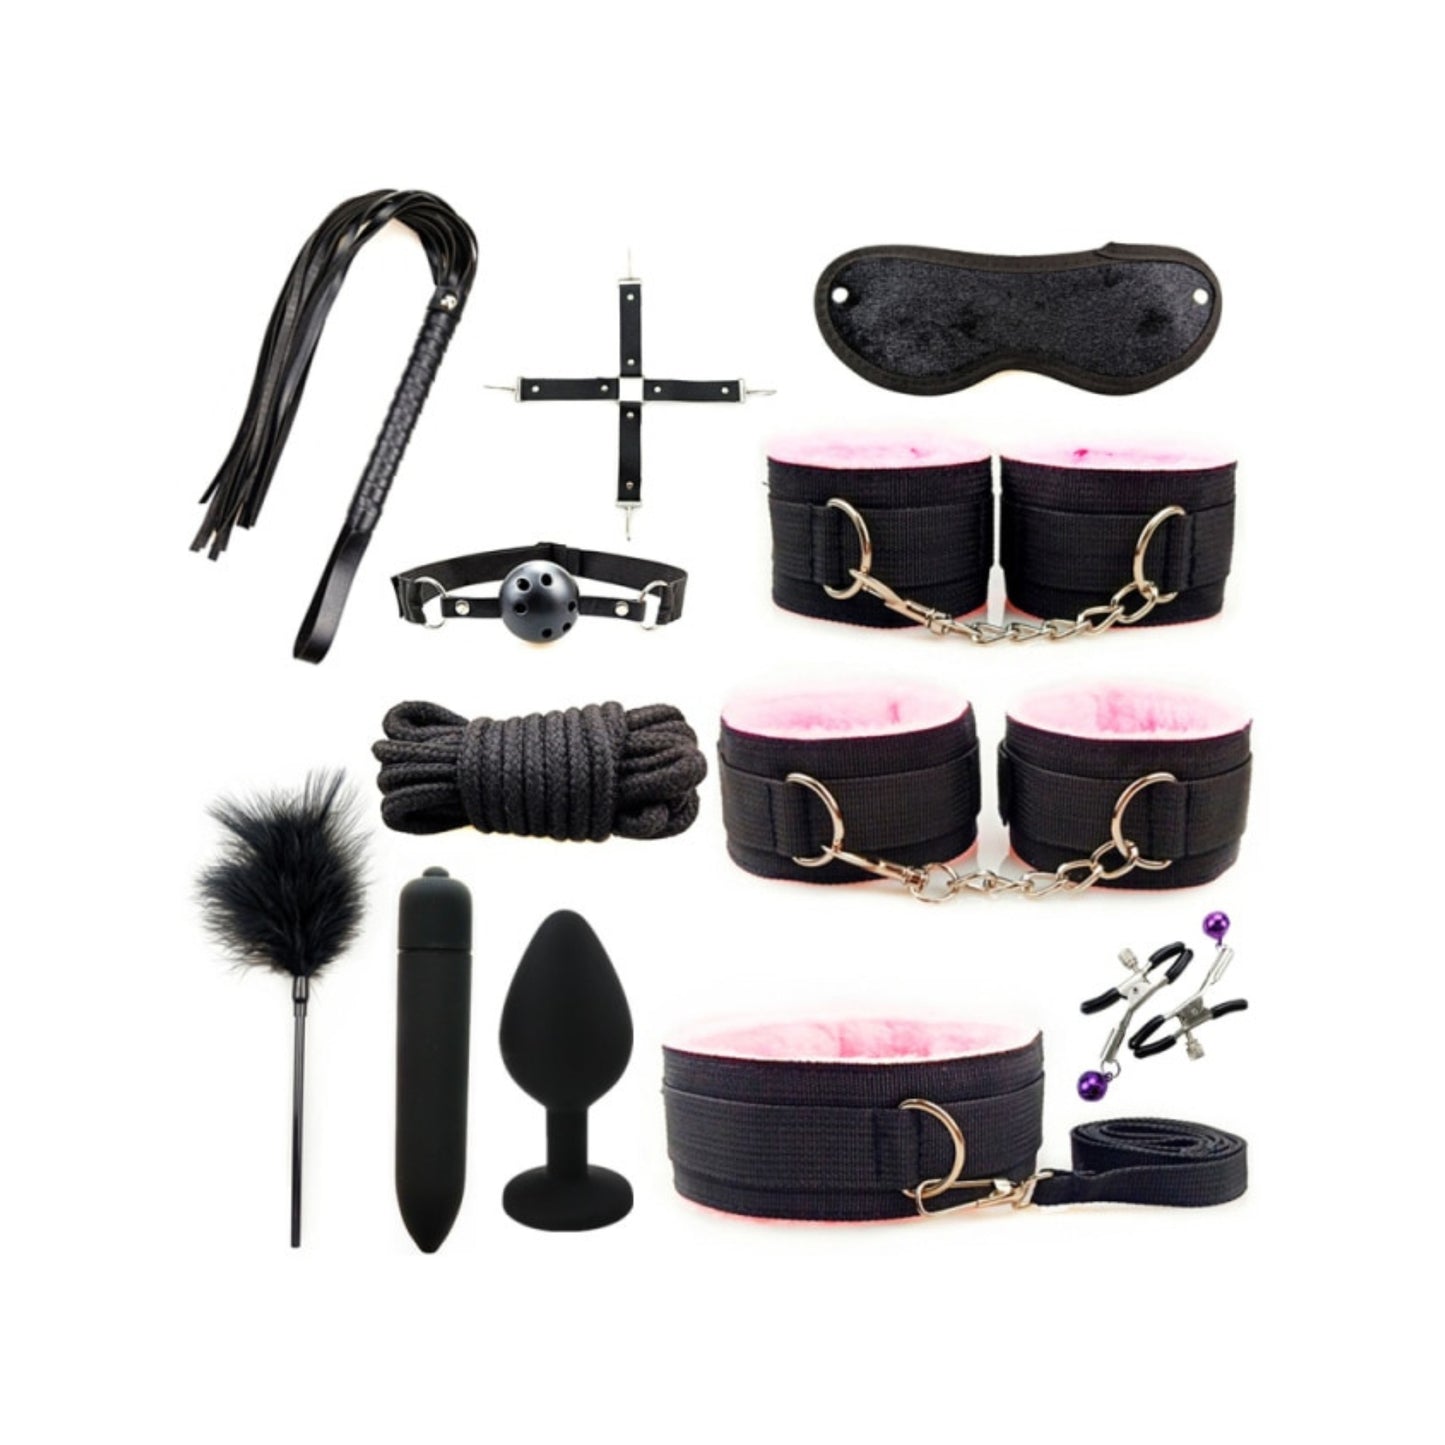 EXPLORE is the 12 piece all you need bondage kit.